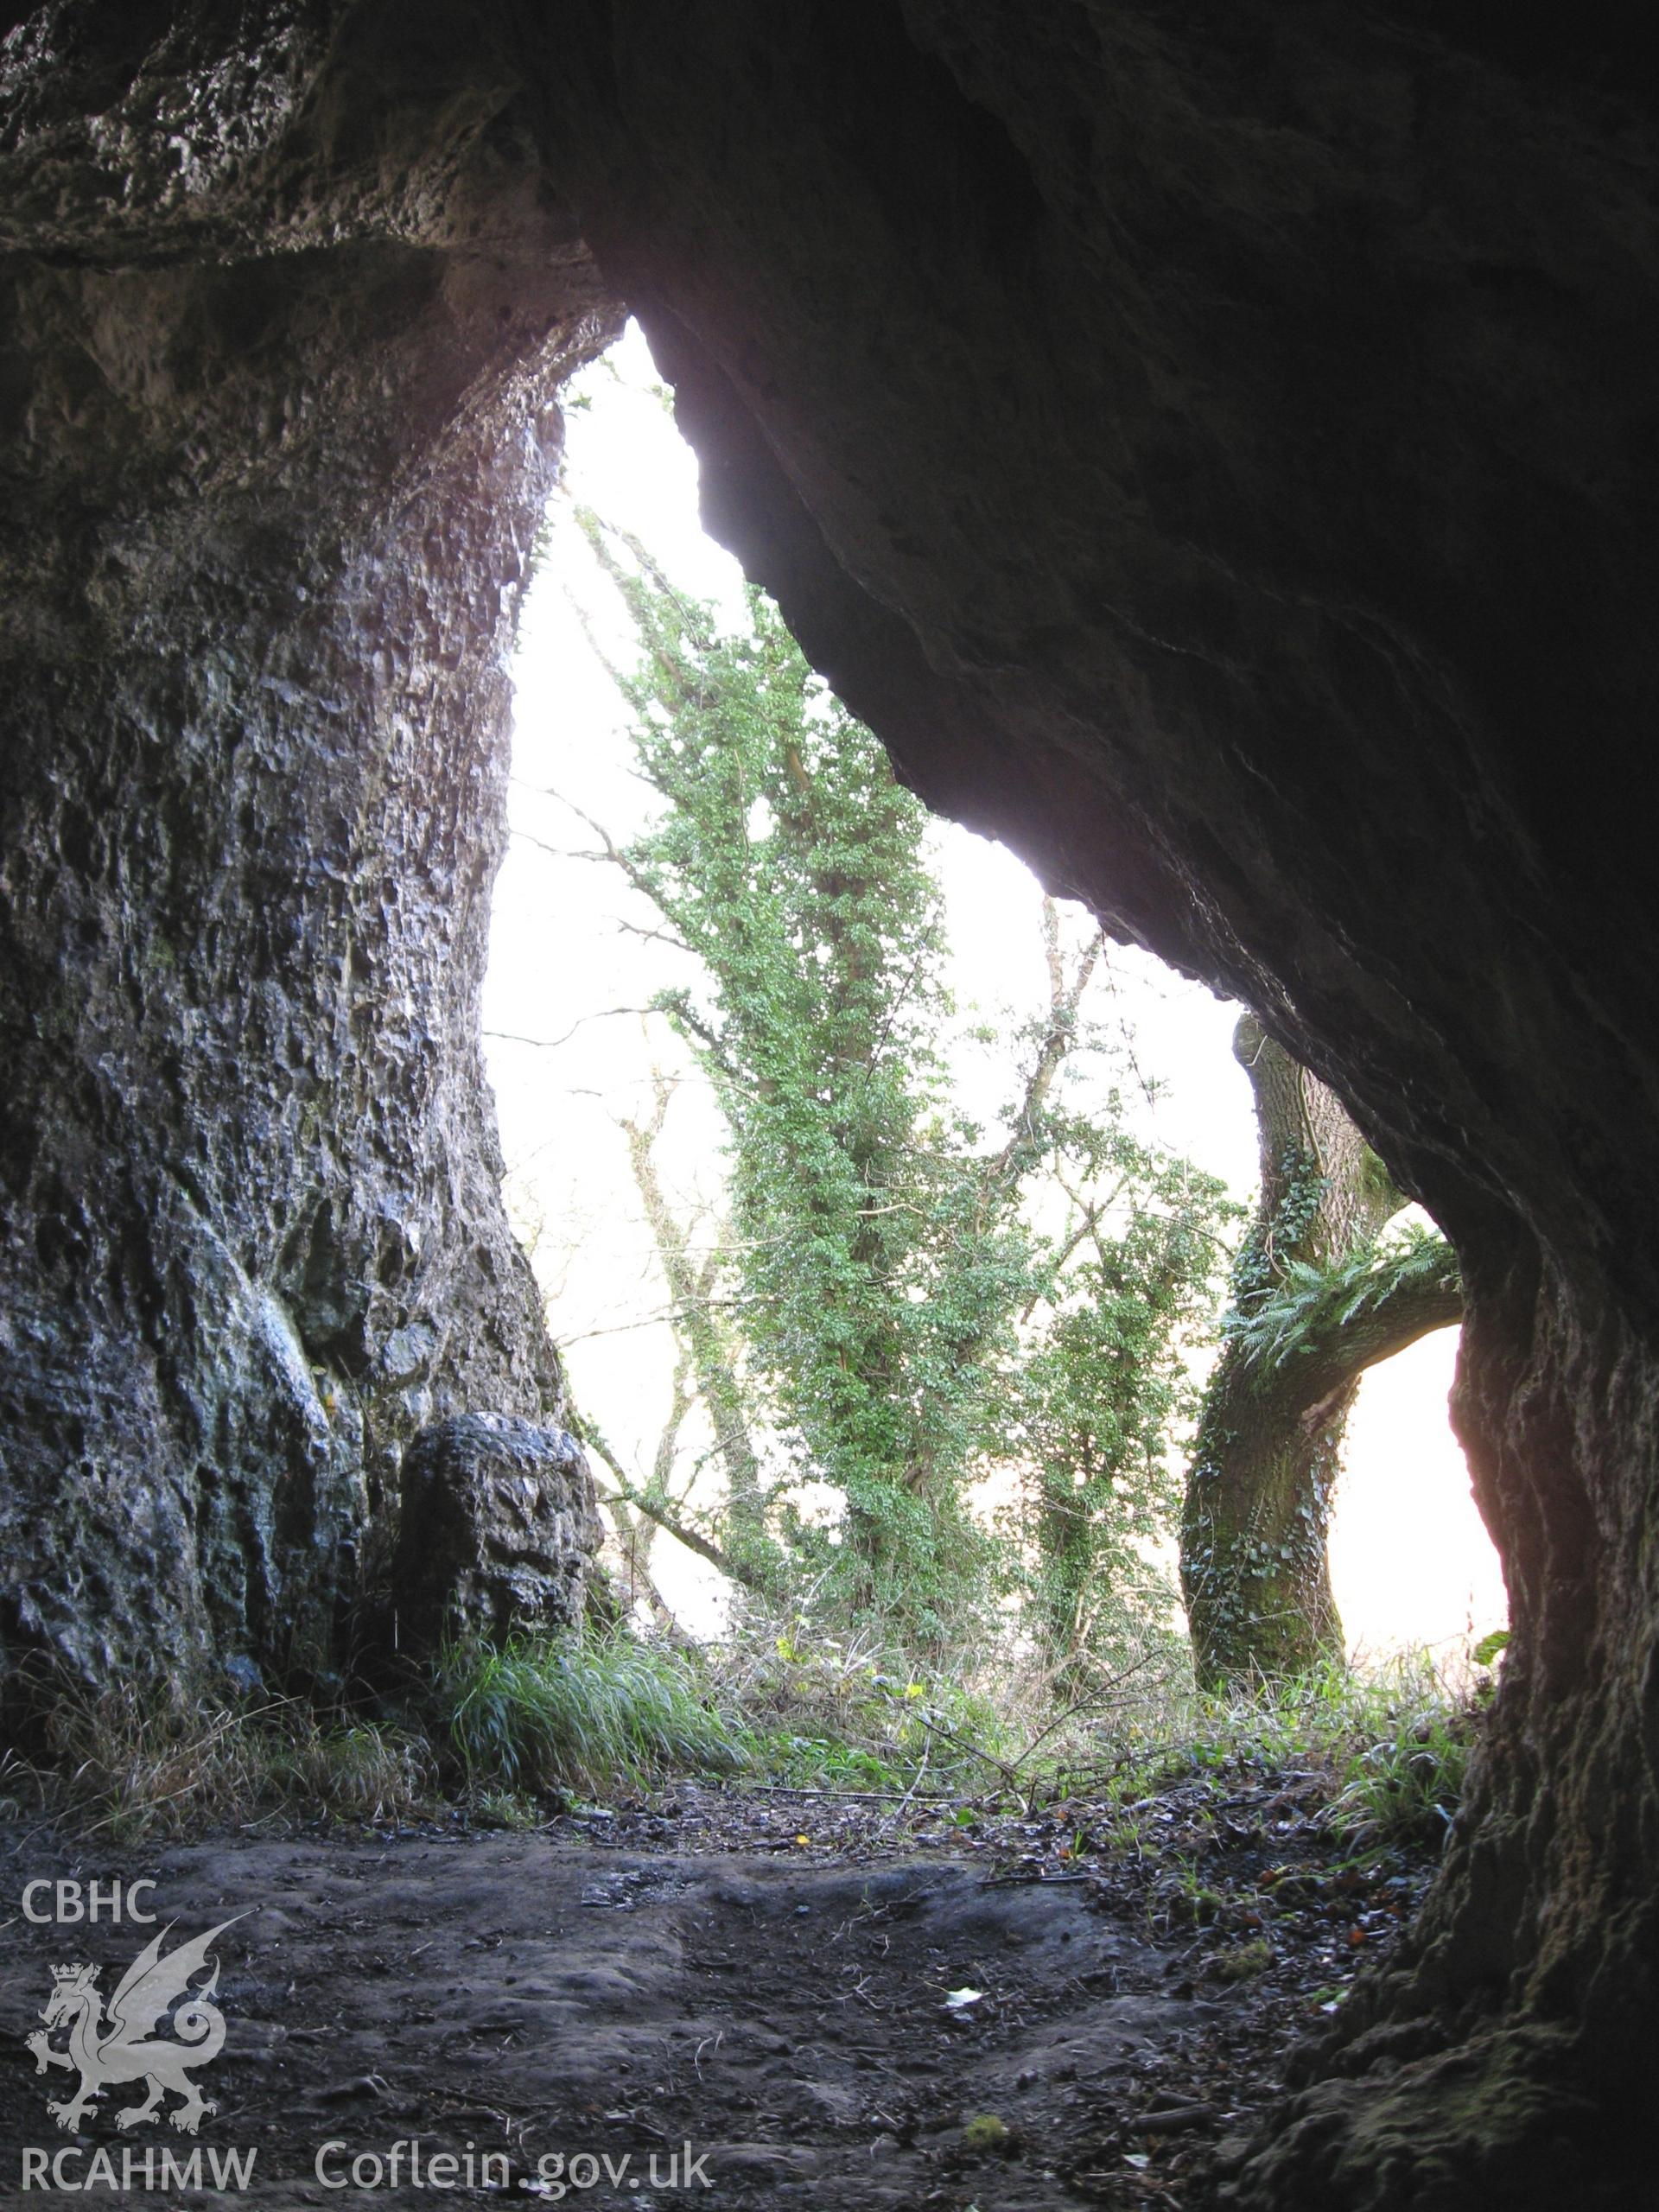 Colour photo showing Hoyles Mouth Cave, taken by Paul R. Davis and dated 1st January 1980.